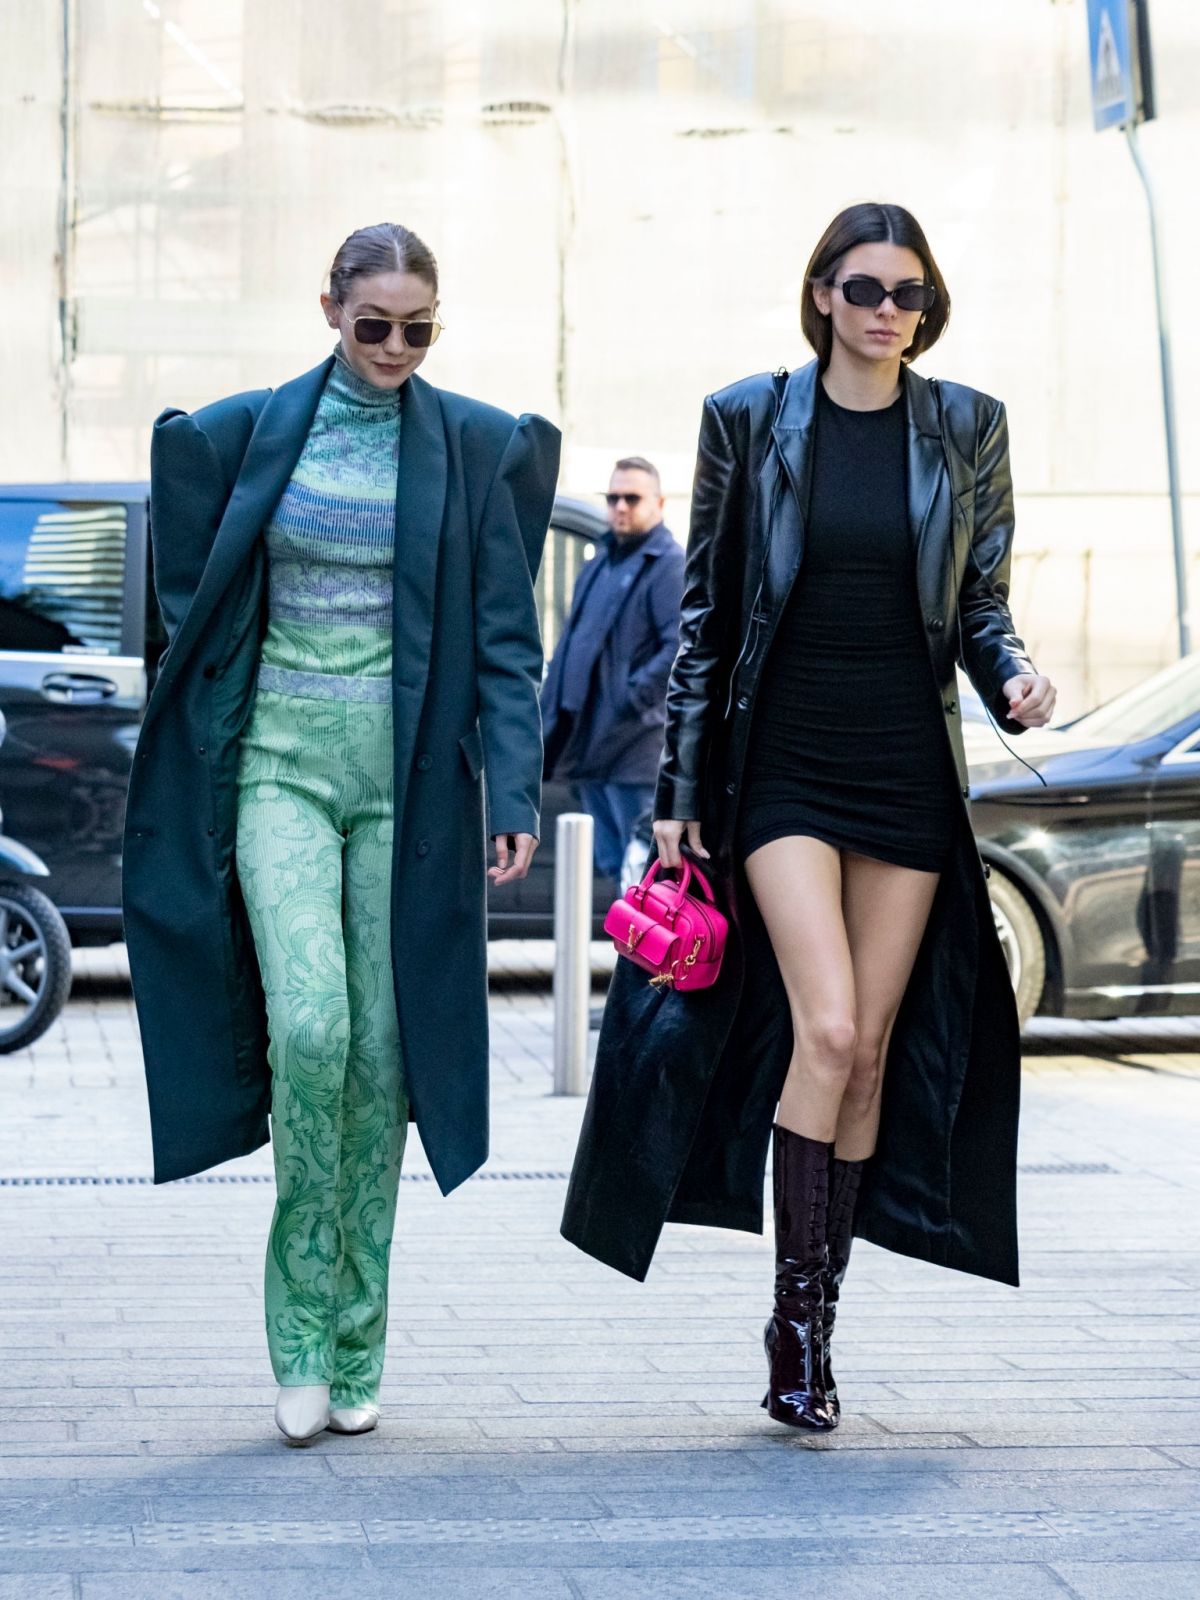 KENDALL JENNER and GIGI HADID Out in Milan 02/21/2020 – HawtCelebs